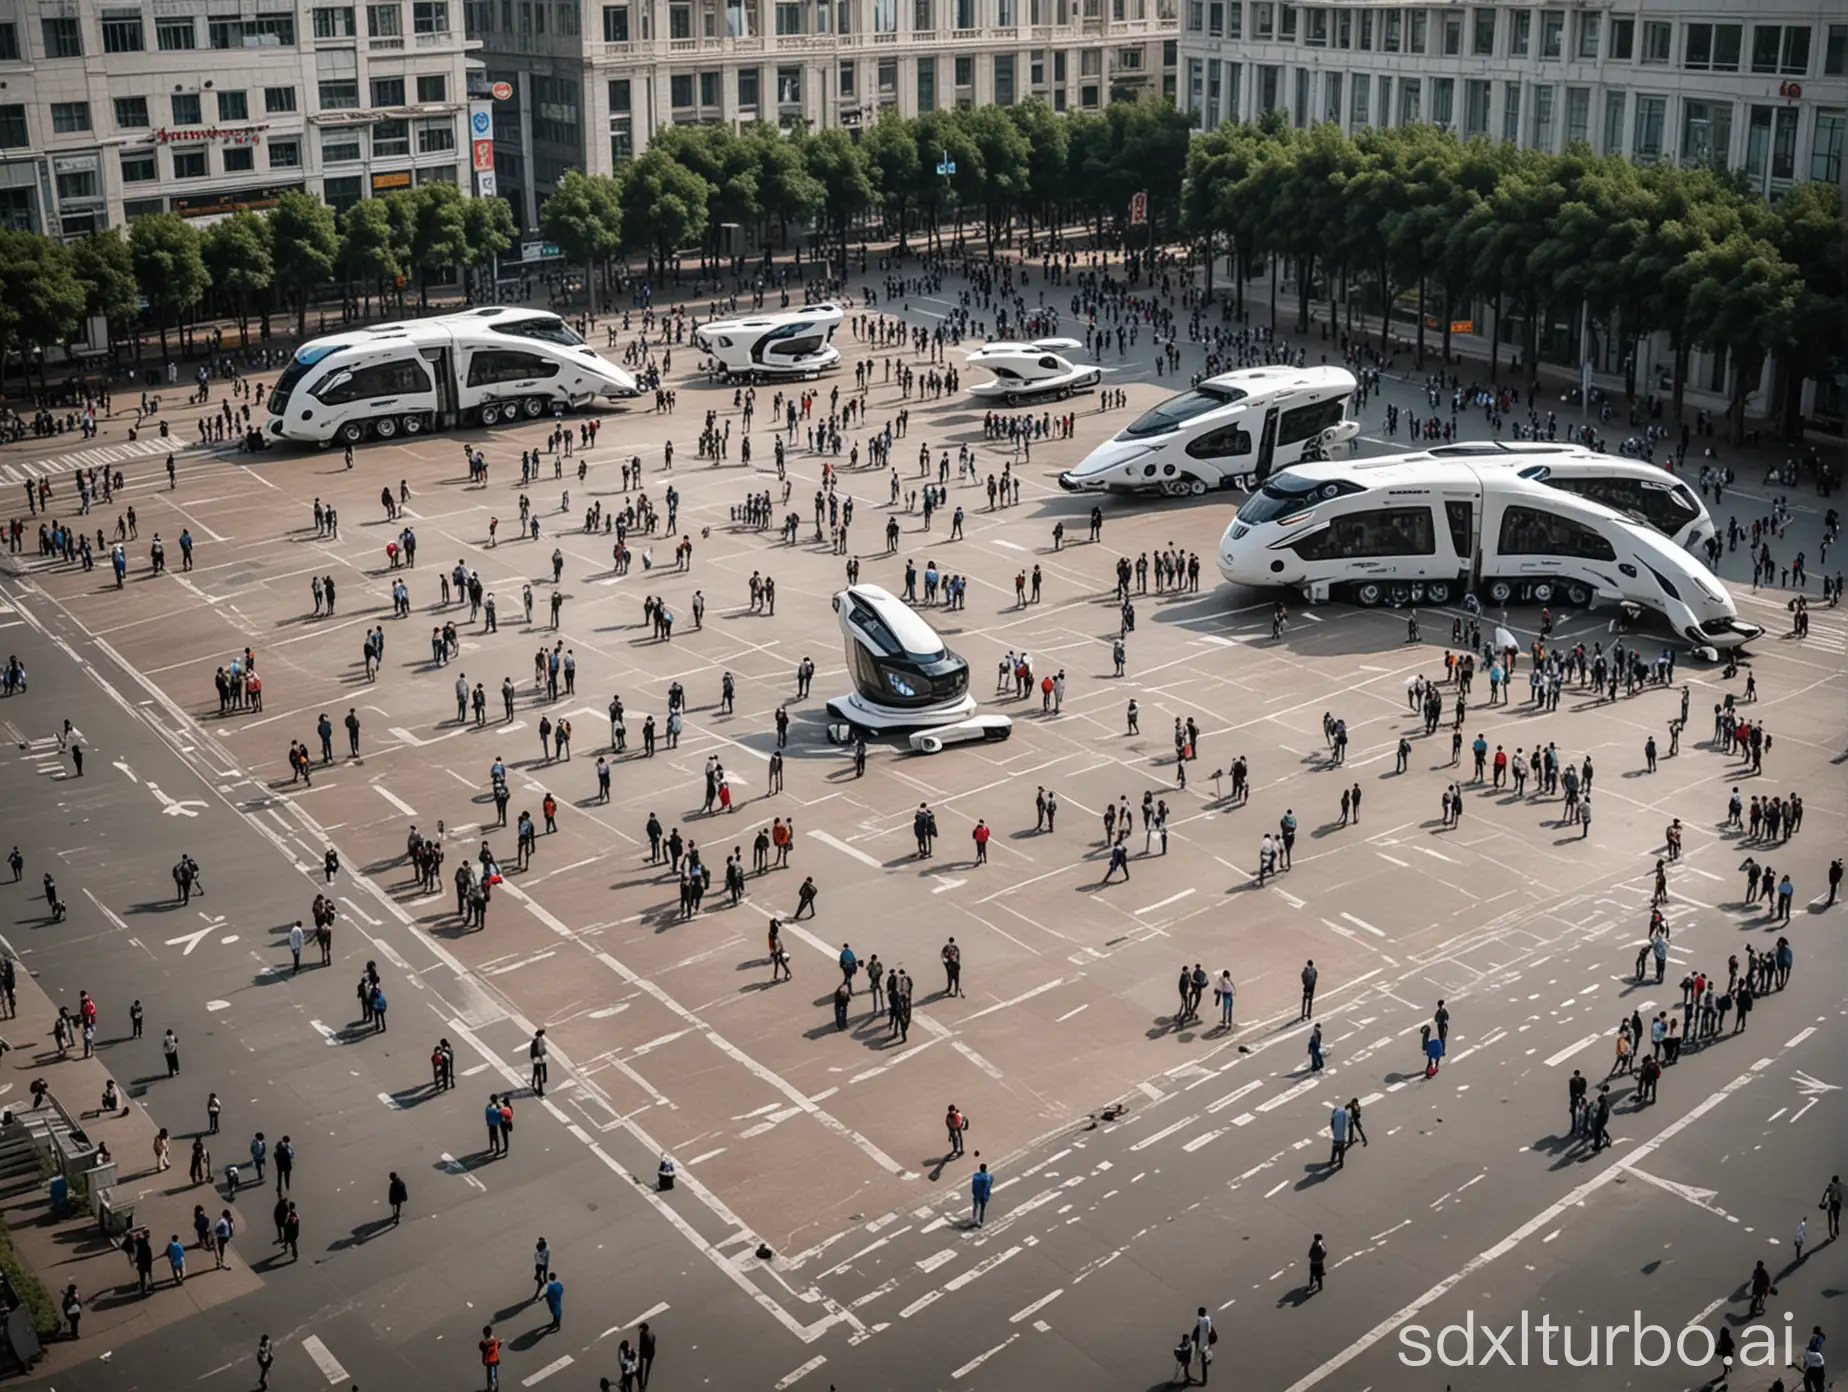 Wide People's Square, where humans and robots shuttle, reflecting scenes of human-machine interaction.